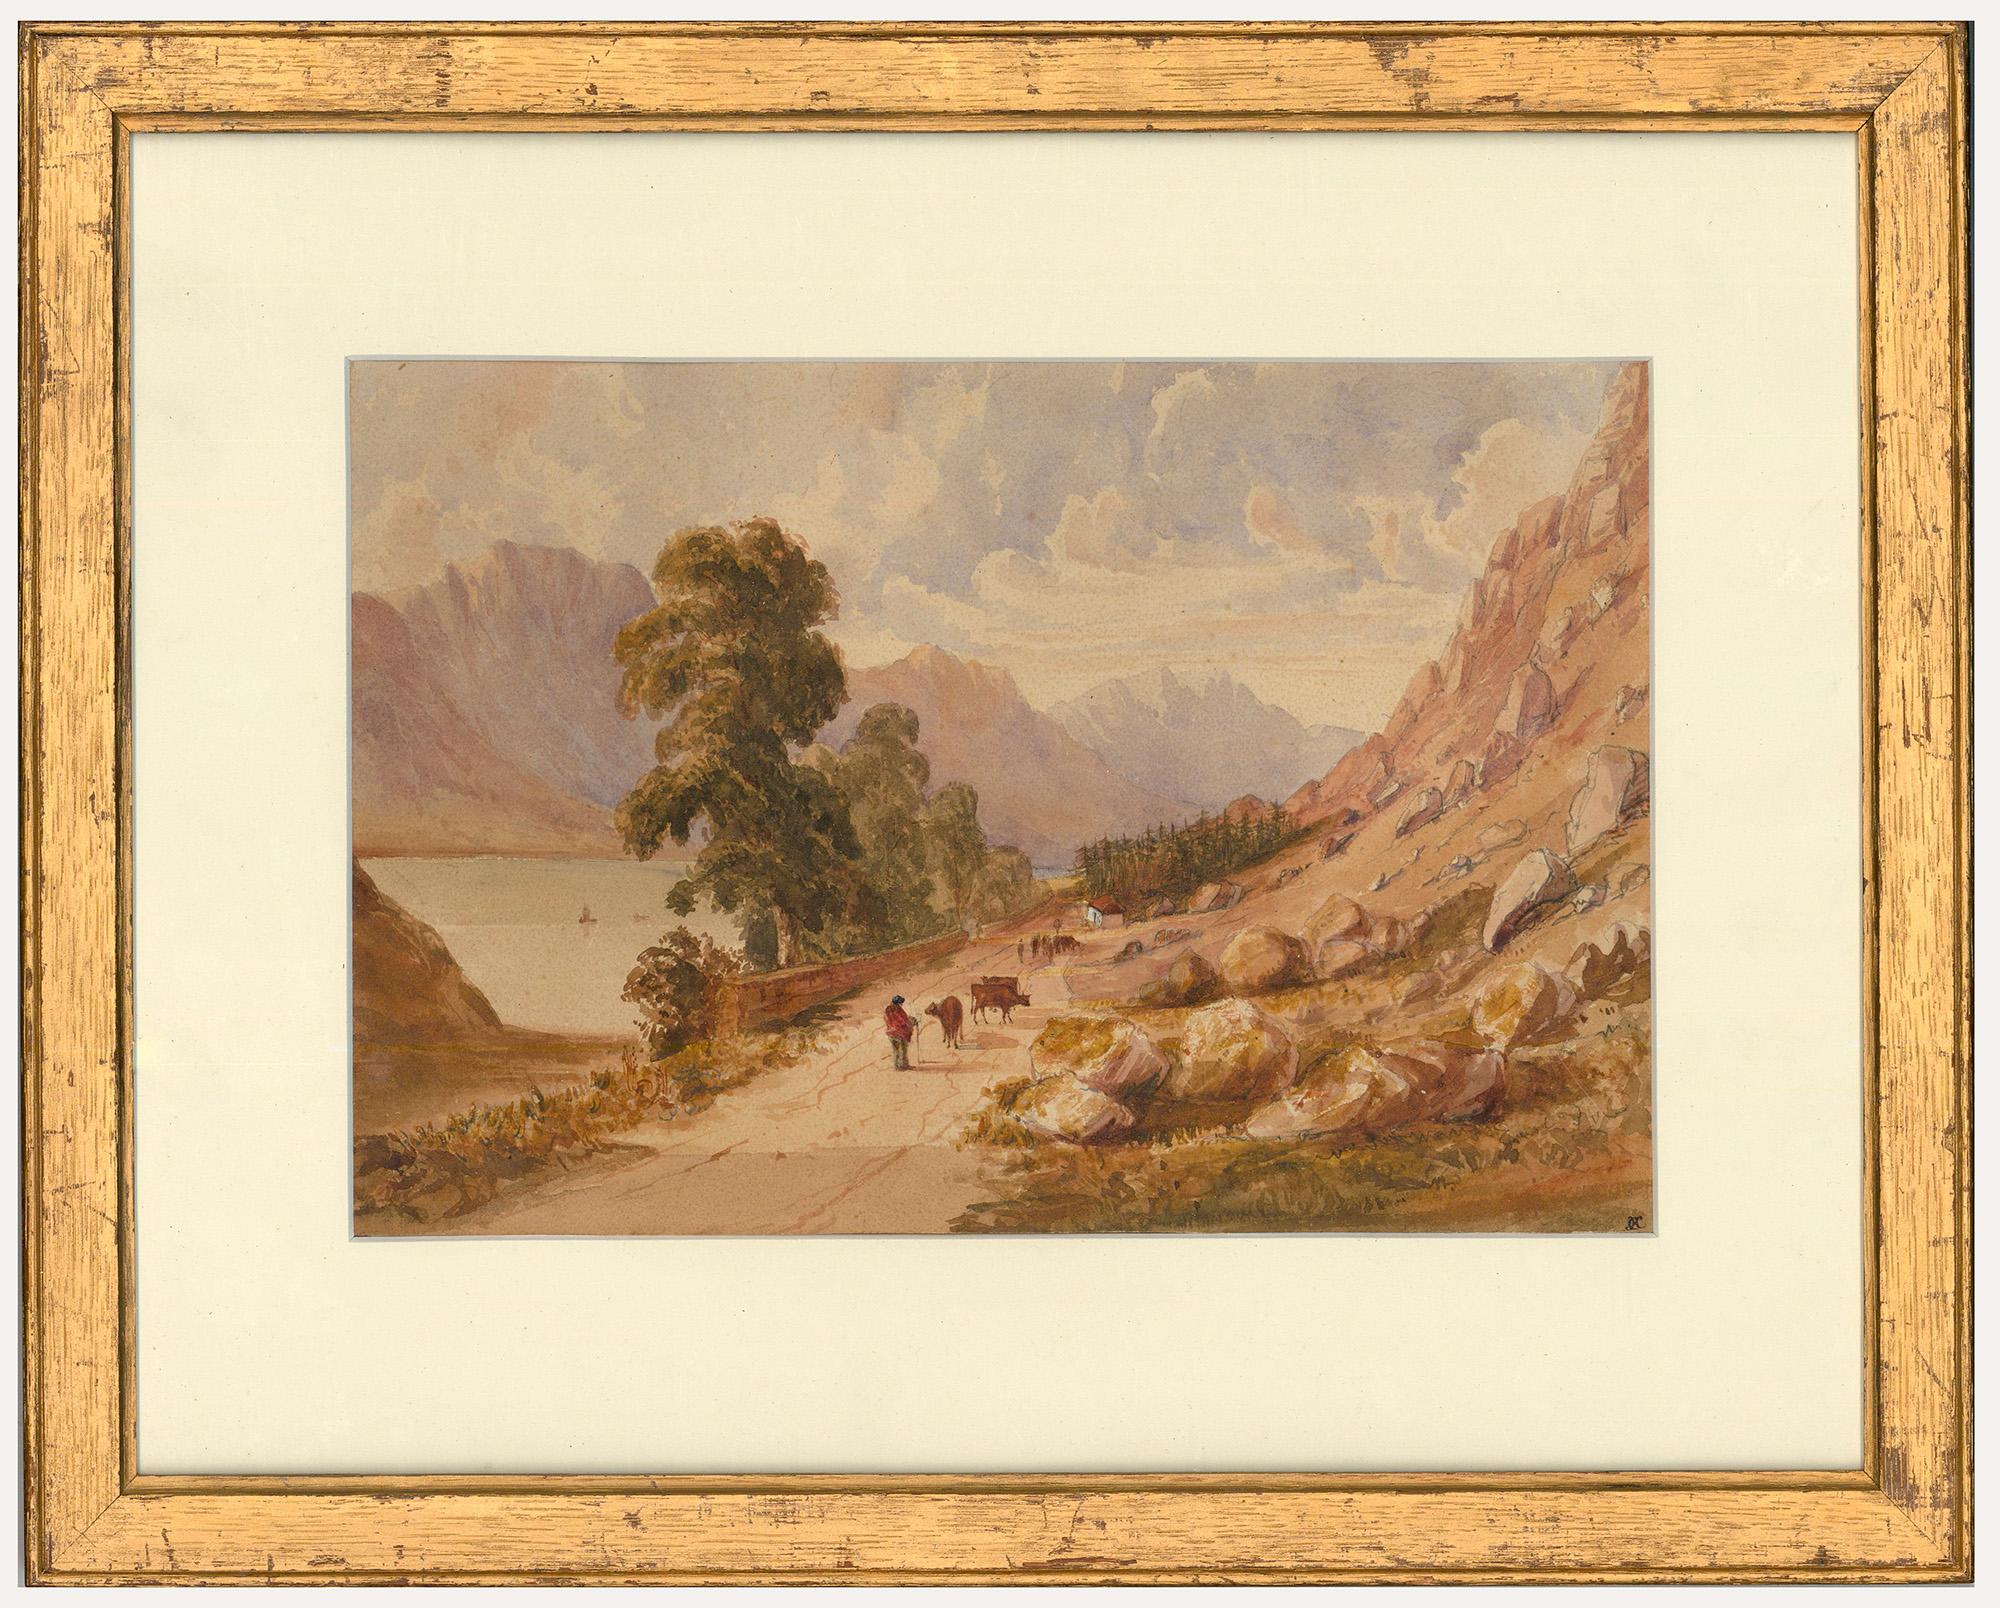 A delightful watercolour scene by Charles Parsons Knight (1829-1897), depicting a European farmer herding a small group of cattle down a scenic lakeside path. The watercolour has been monogrammed by the artist to the lower right. Well-presented in a